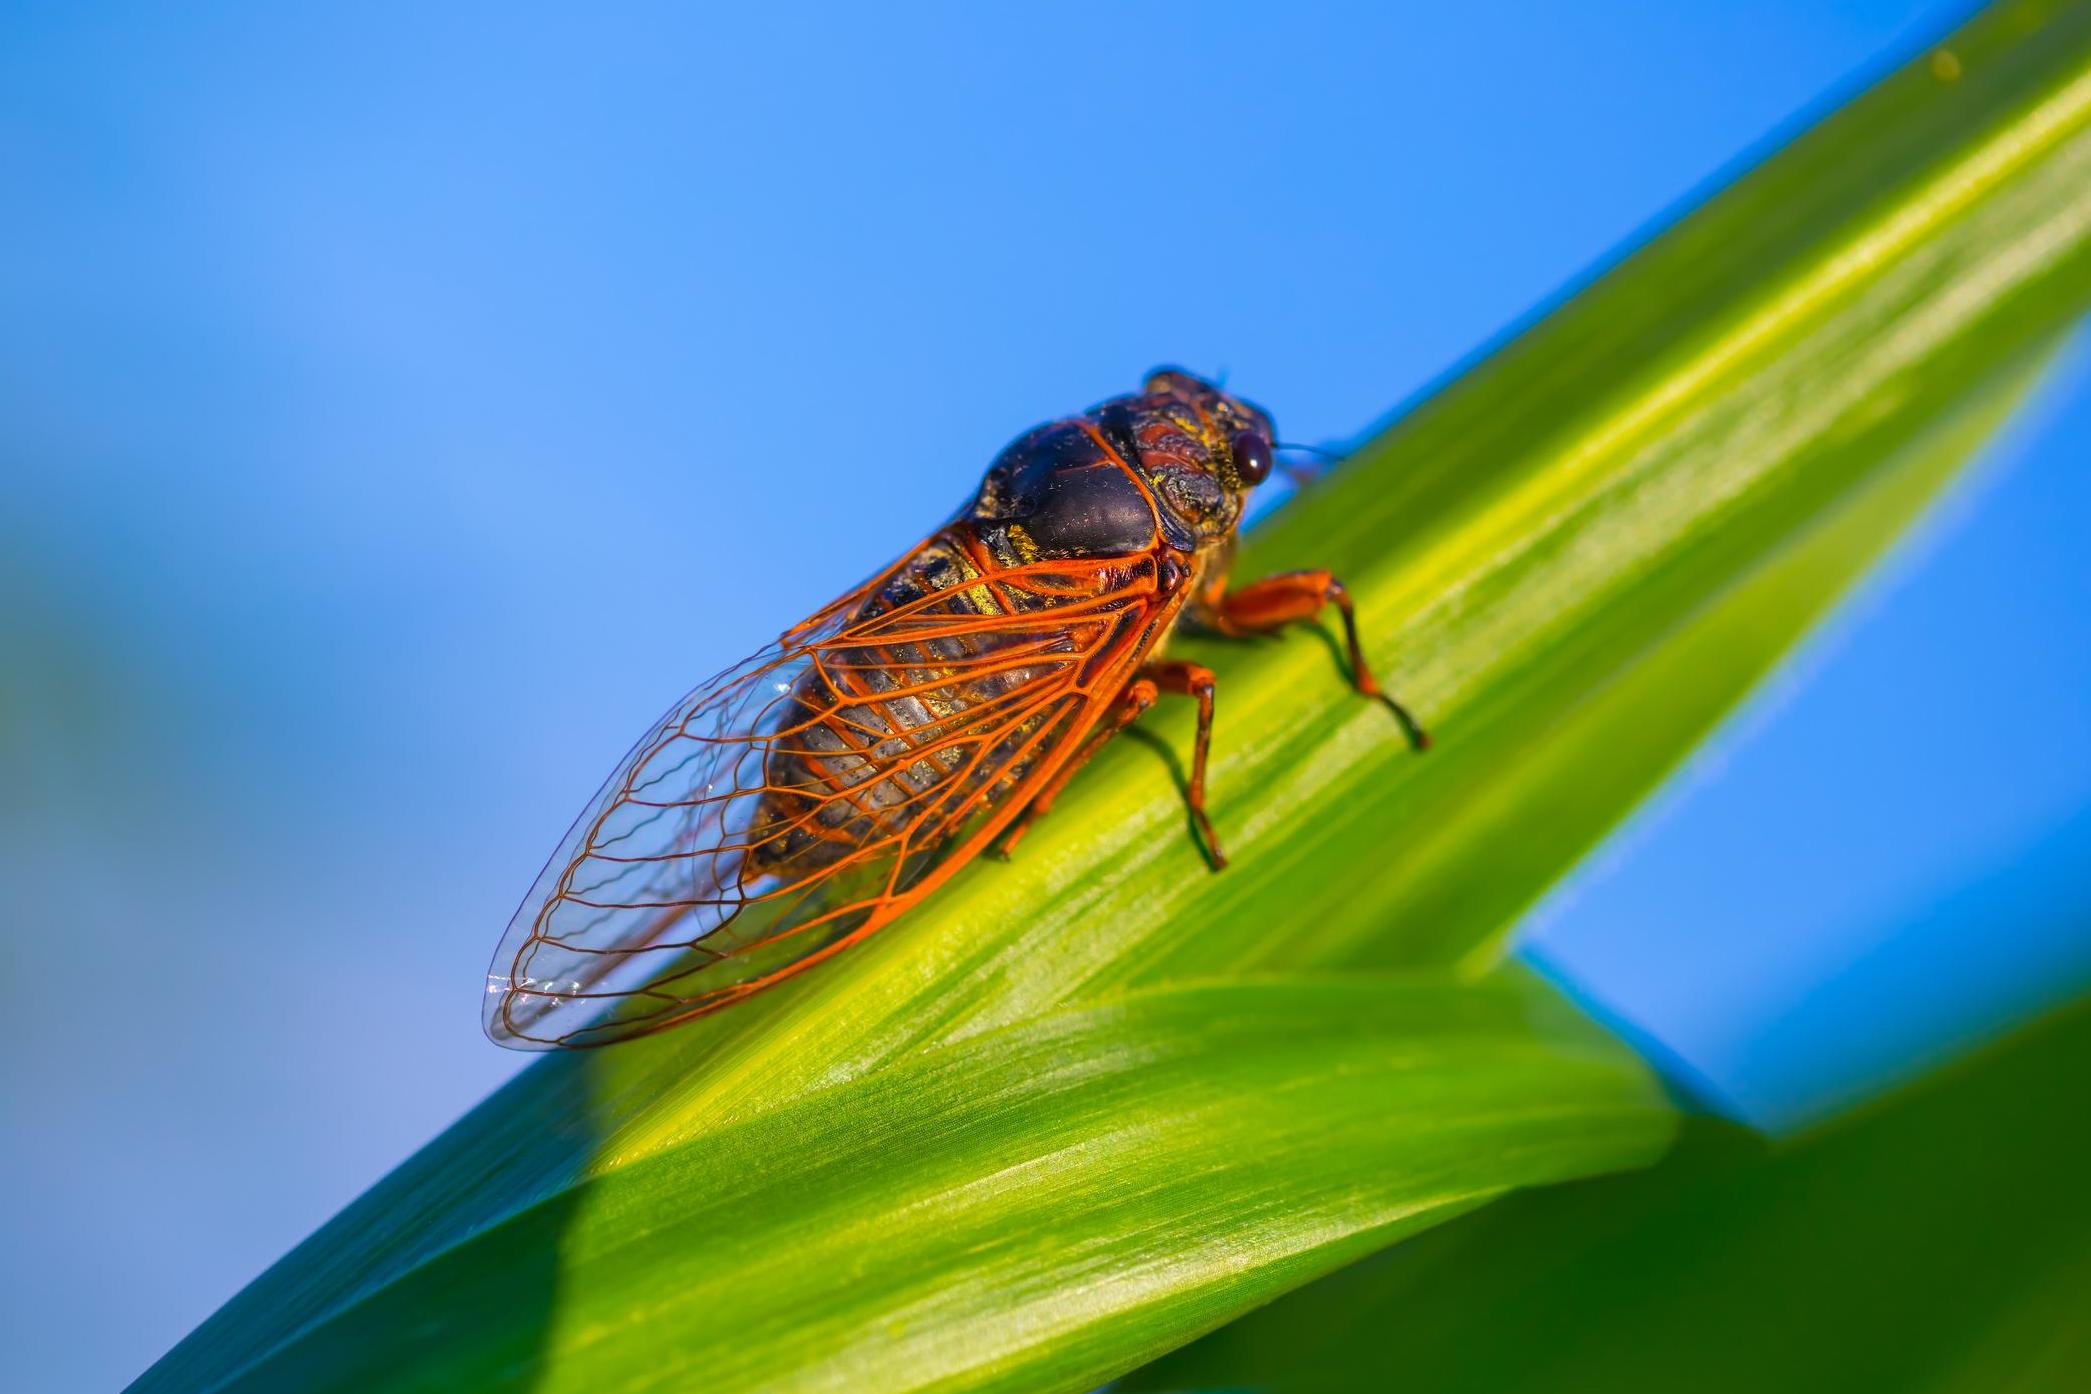 Cicadas / Periodical cicadas are due to surface this year. Expect